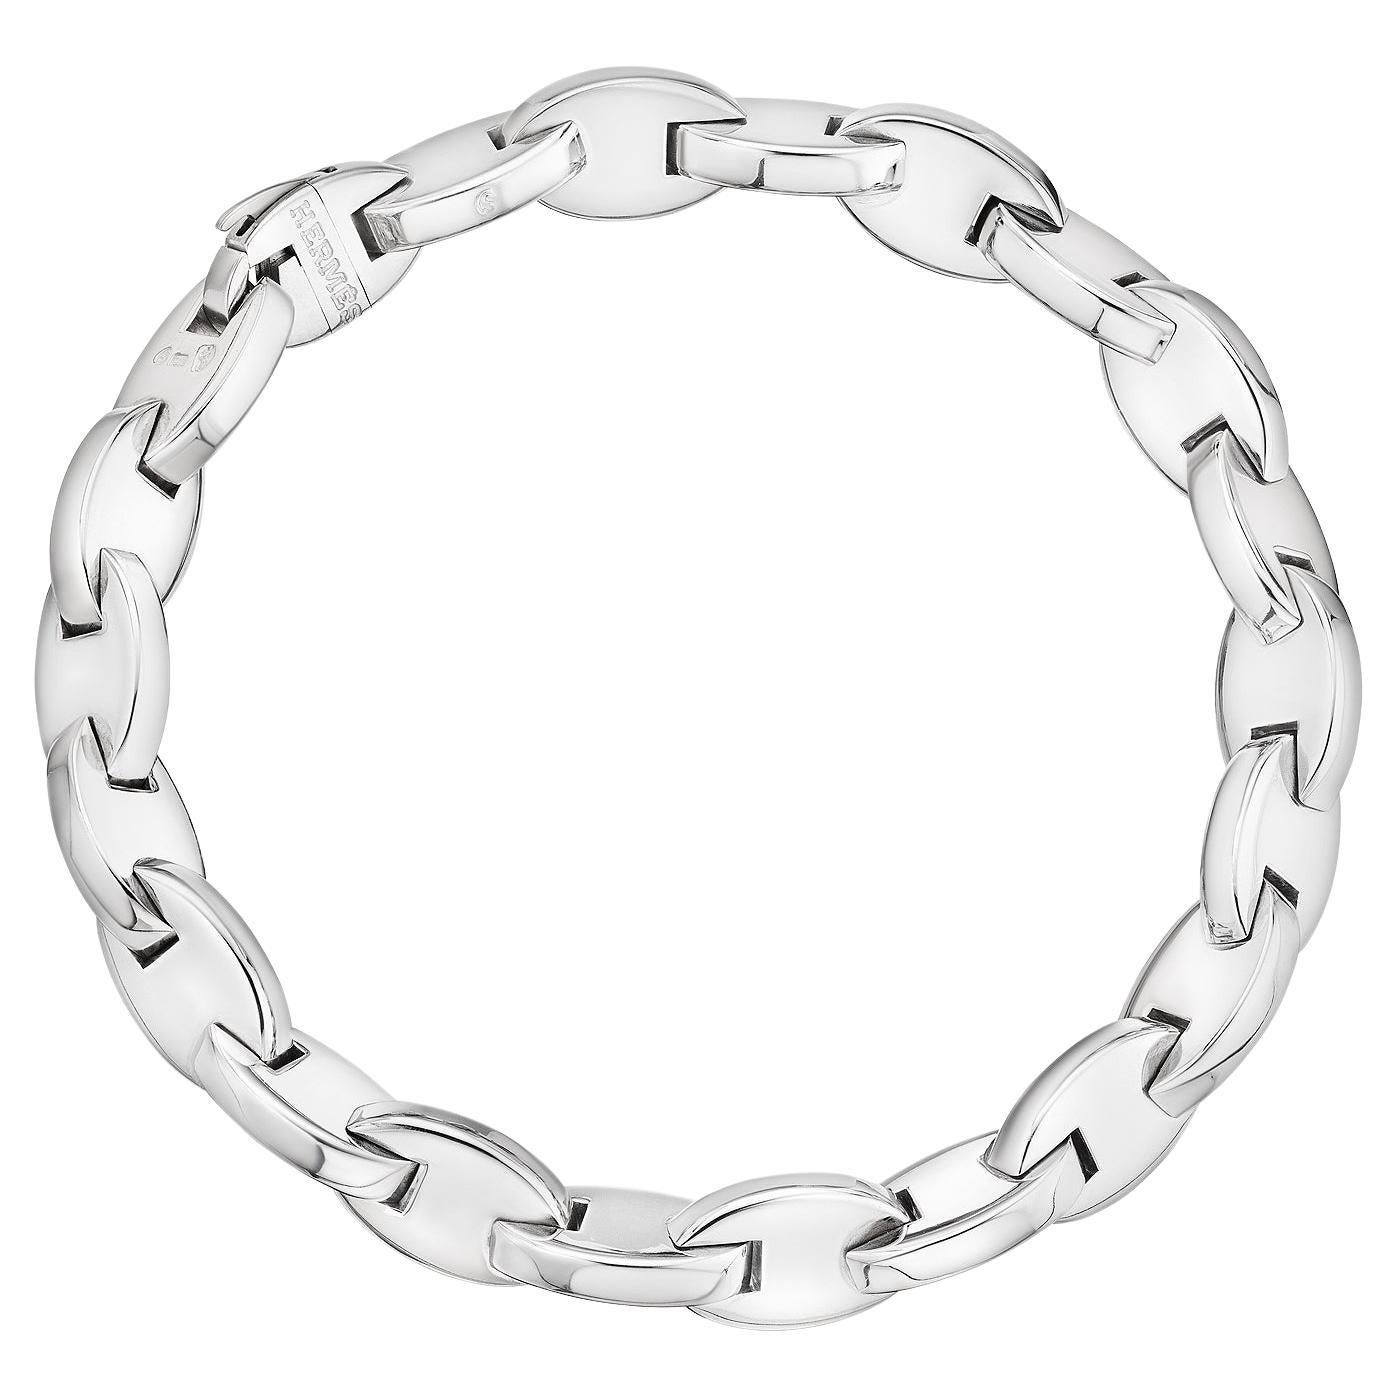 Hermes Paris modernist sleek oval link 18 karat white gold bracelet strongly stands alone or stacked with others but is always perfect worn everyday and everywhere.  Signed Hermes with serial number 60250.  Circa 1980-90.  7 1/2